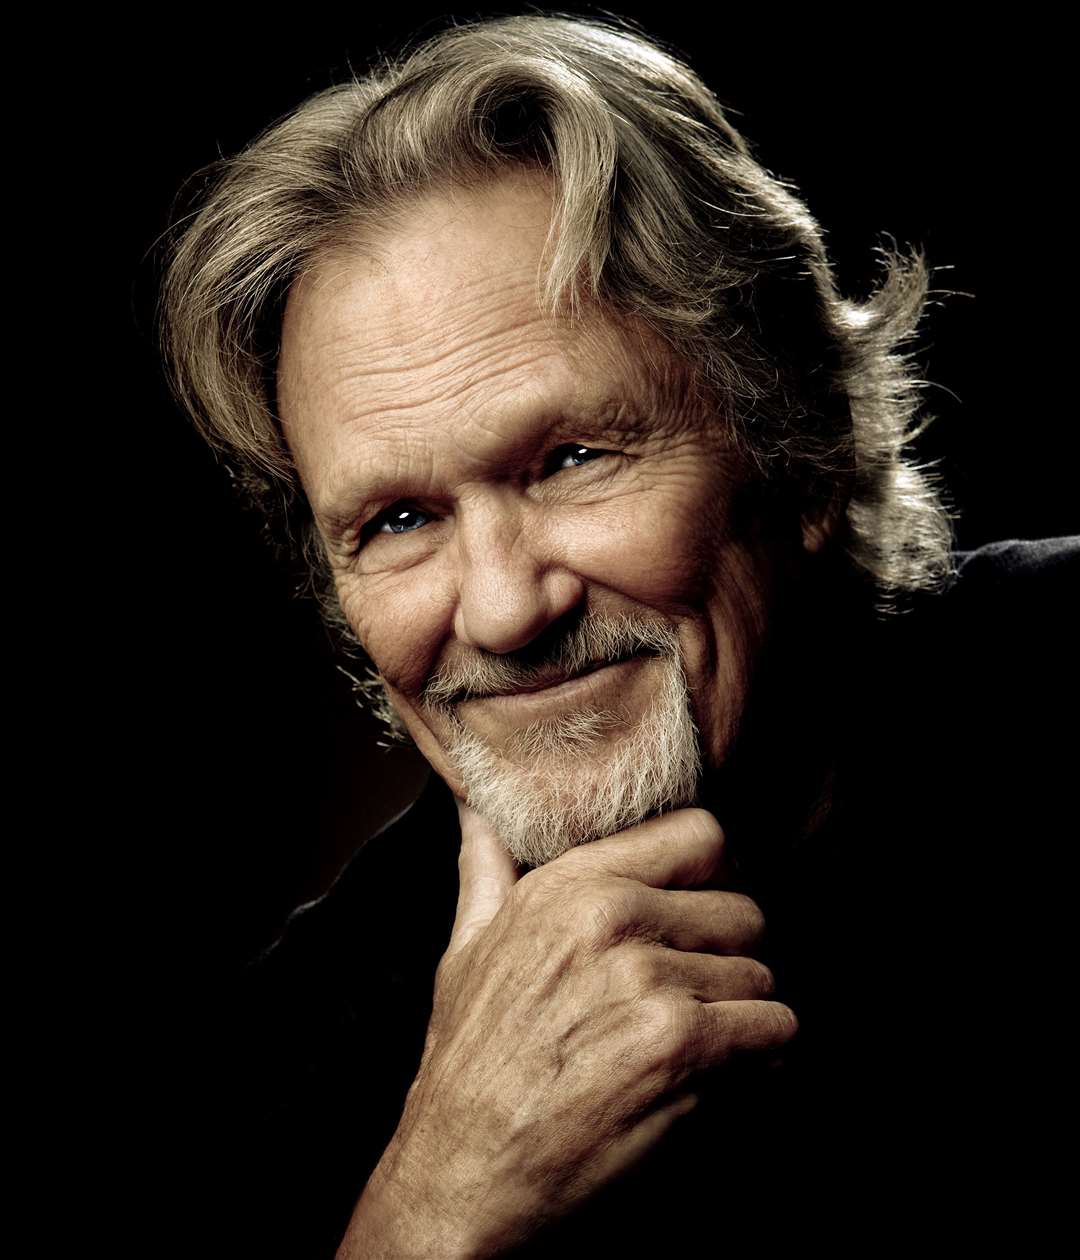 Kris Kristofferson will be at the festival